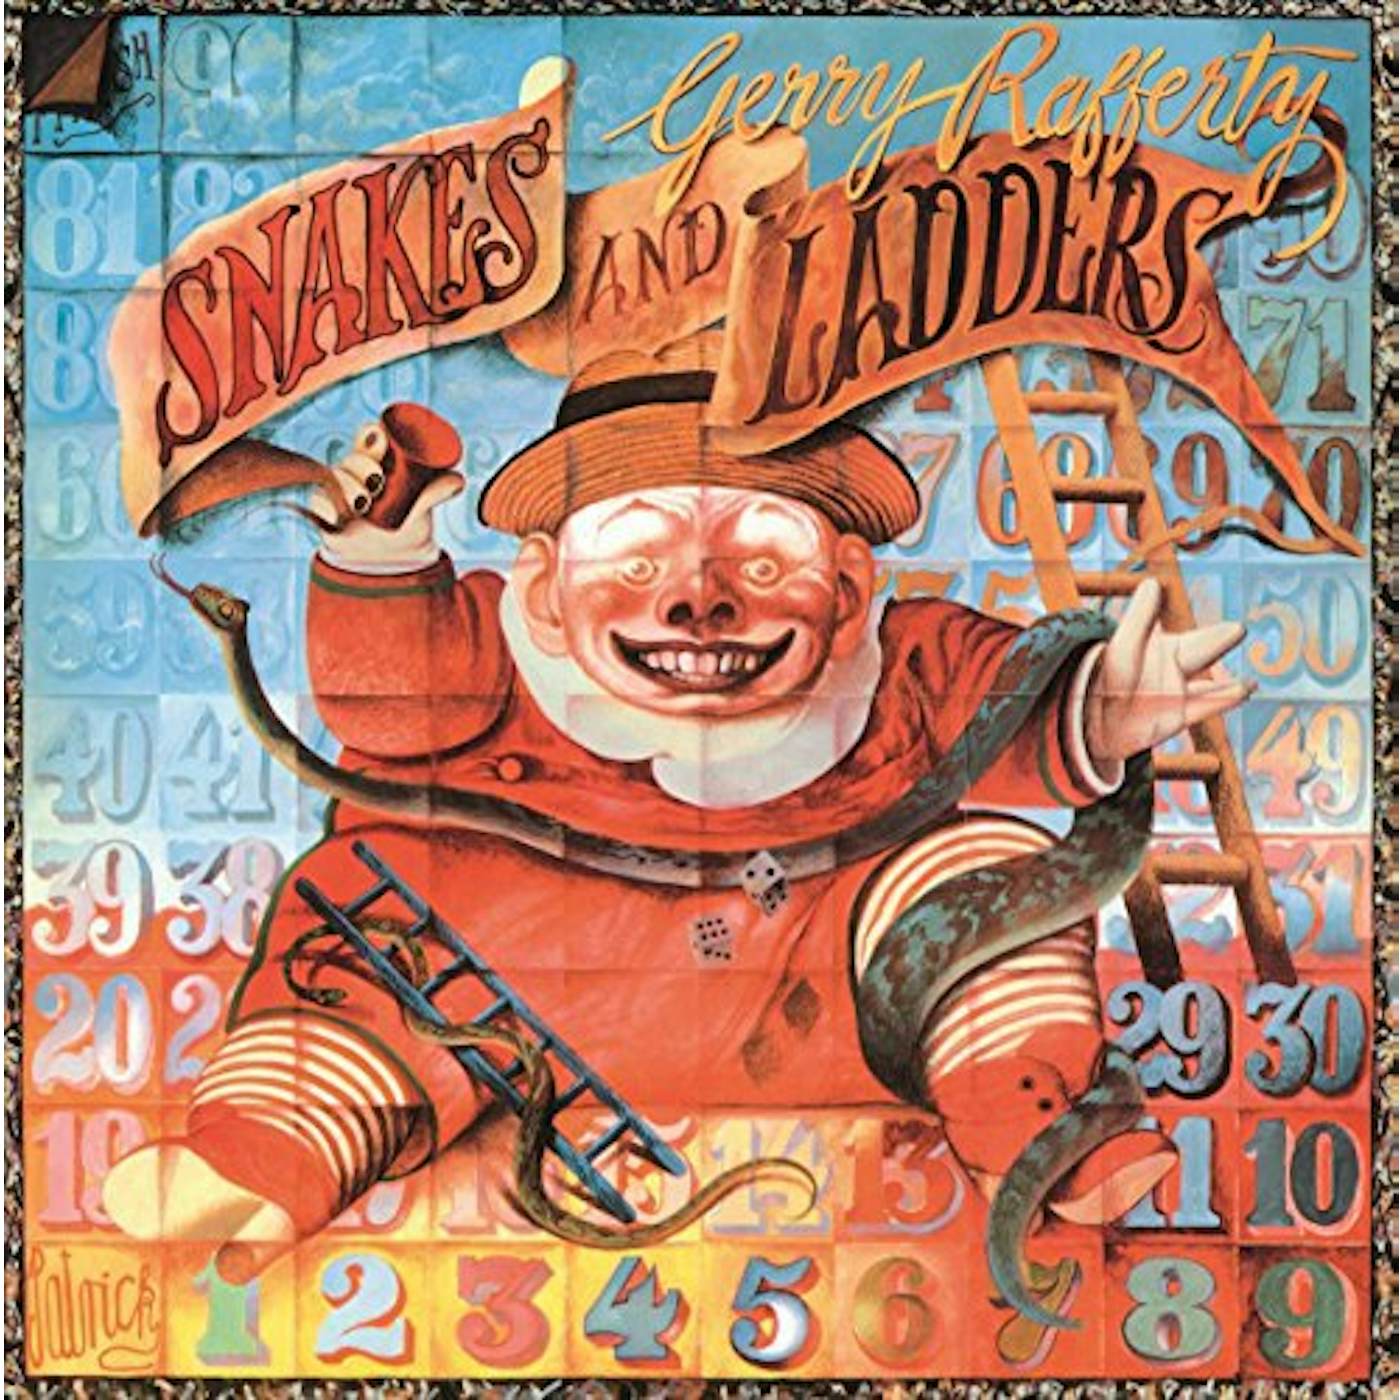 Gerry Rafferty Snakes And Ladders Vinyl Record